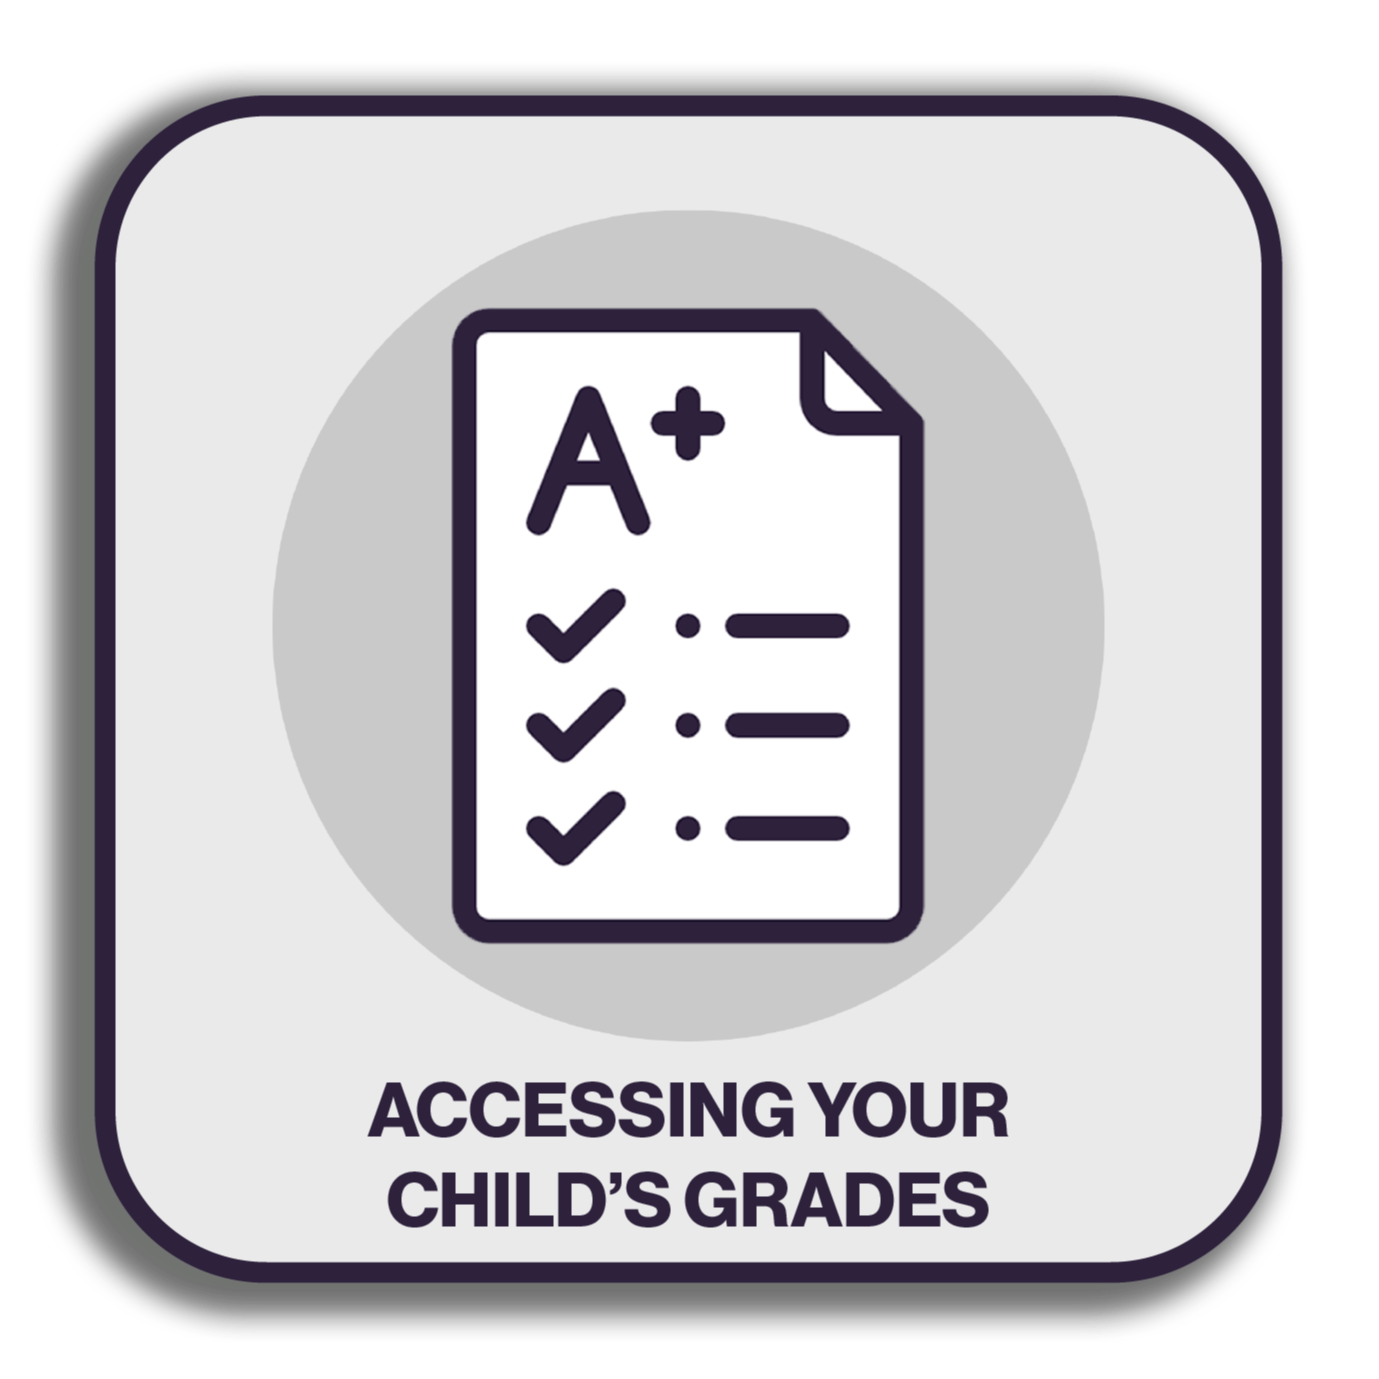 Accessing Your Child's Grades Button